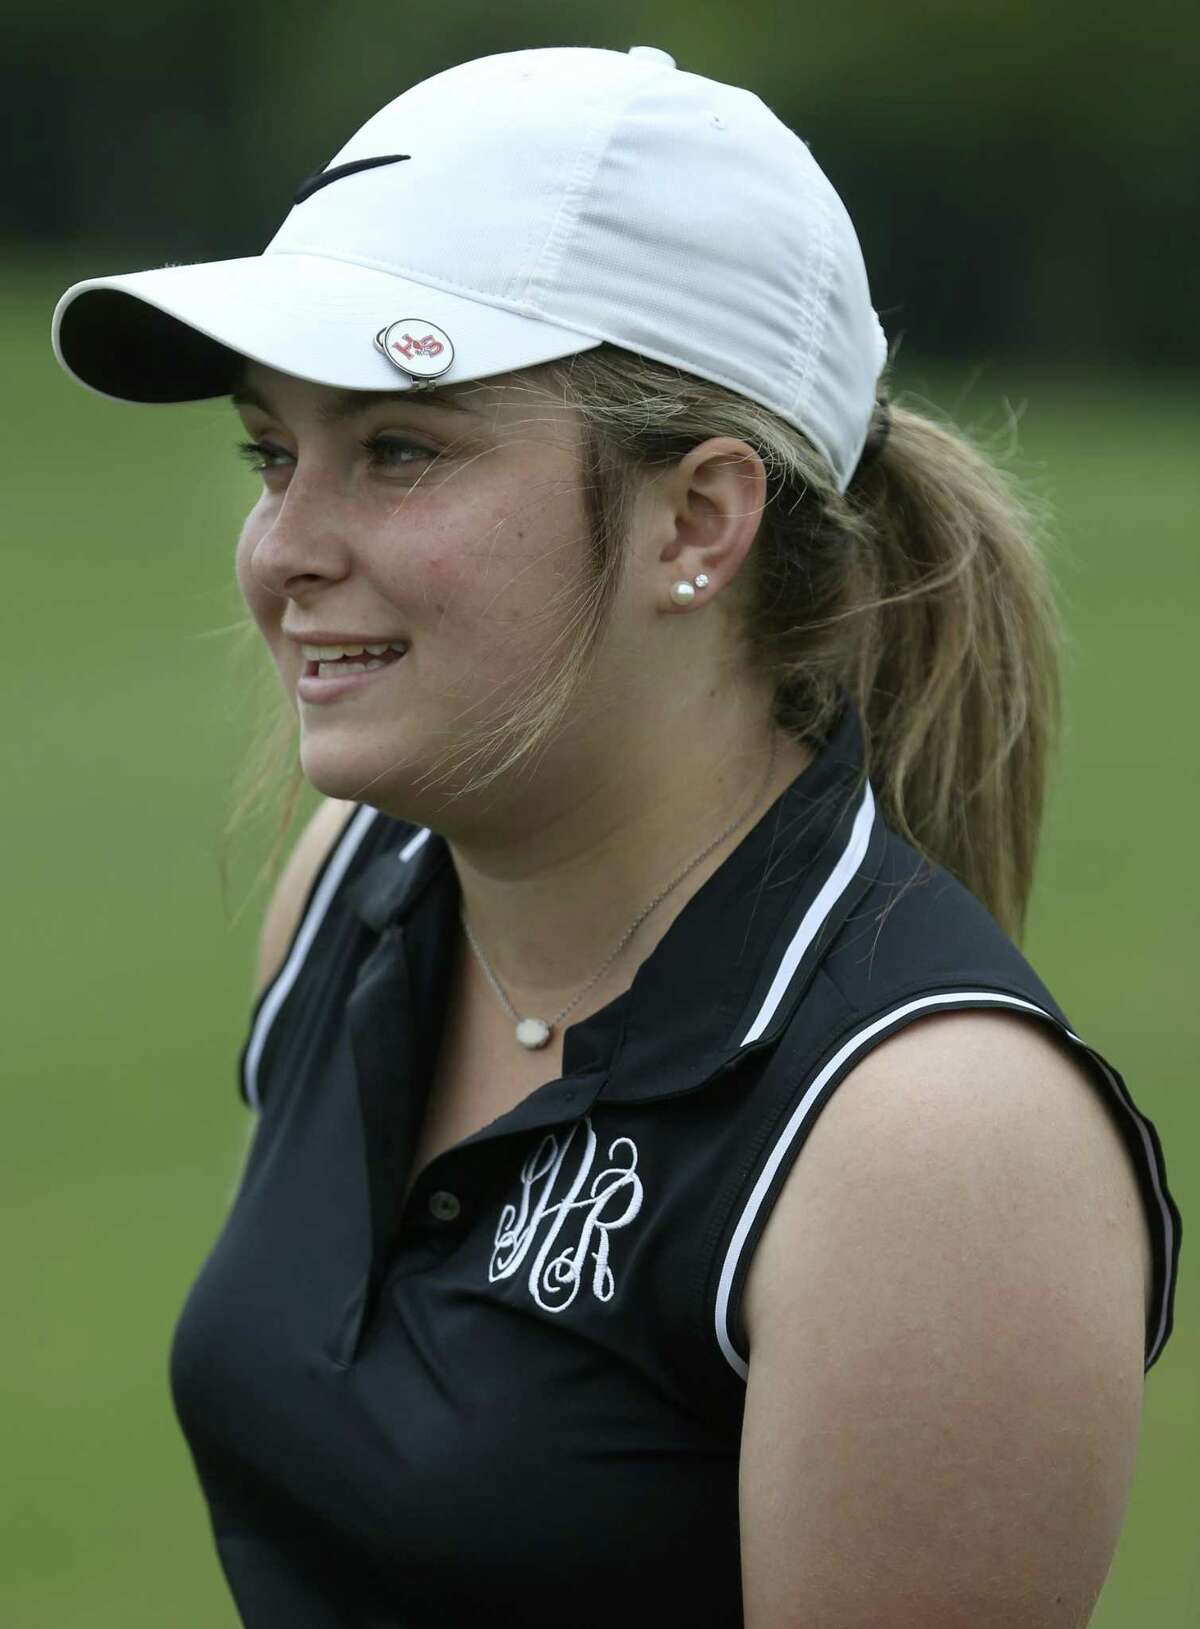 La Vernia senior golf standout Shawnee Allen, seen on May 9, 2017, won the UIL state golf tournament as a freshman and sophomore but didn’t even play in the district tournament as a junior. The day before it started, she was hospitalized and diagnosed with ulcerative colitis. Allen has been coping with that since but has worked her back to the 4A state tournament, which is May 15-16 in Horseshoe Bay